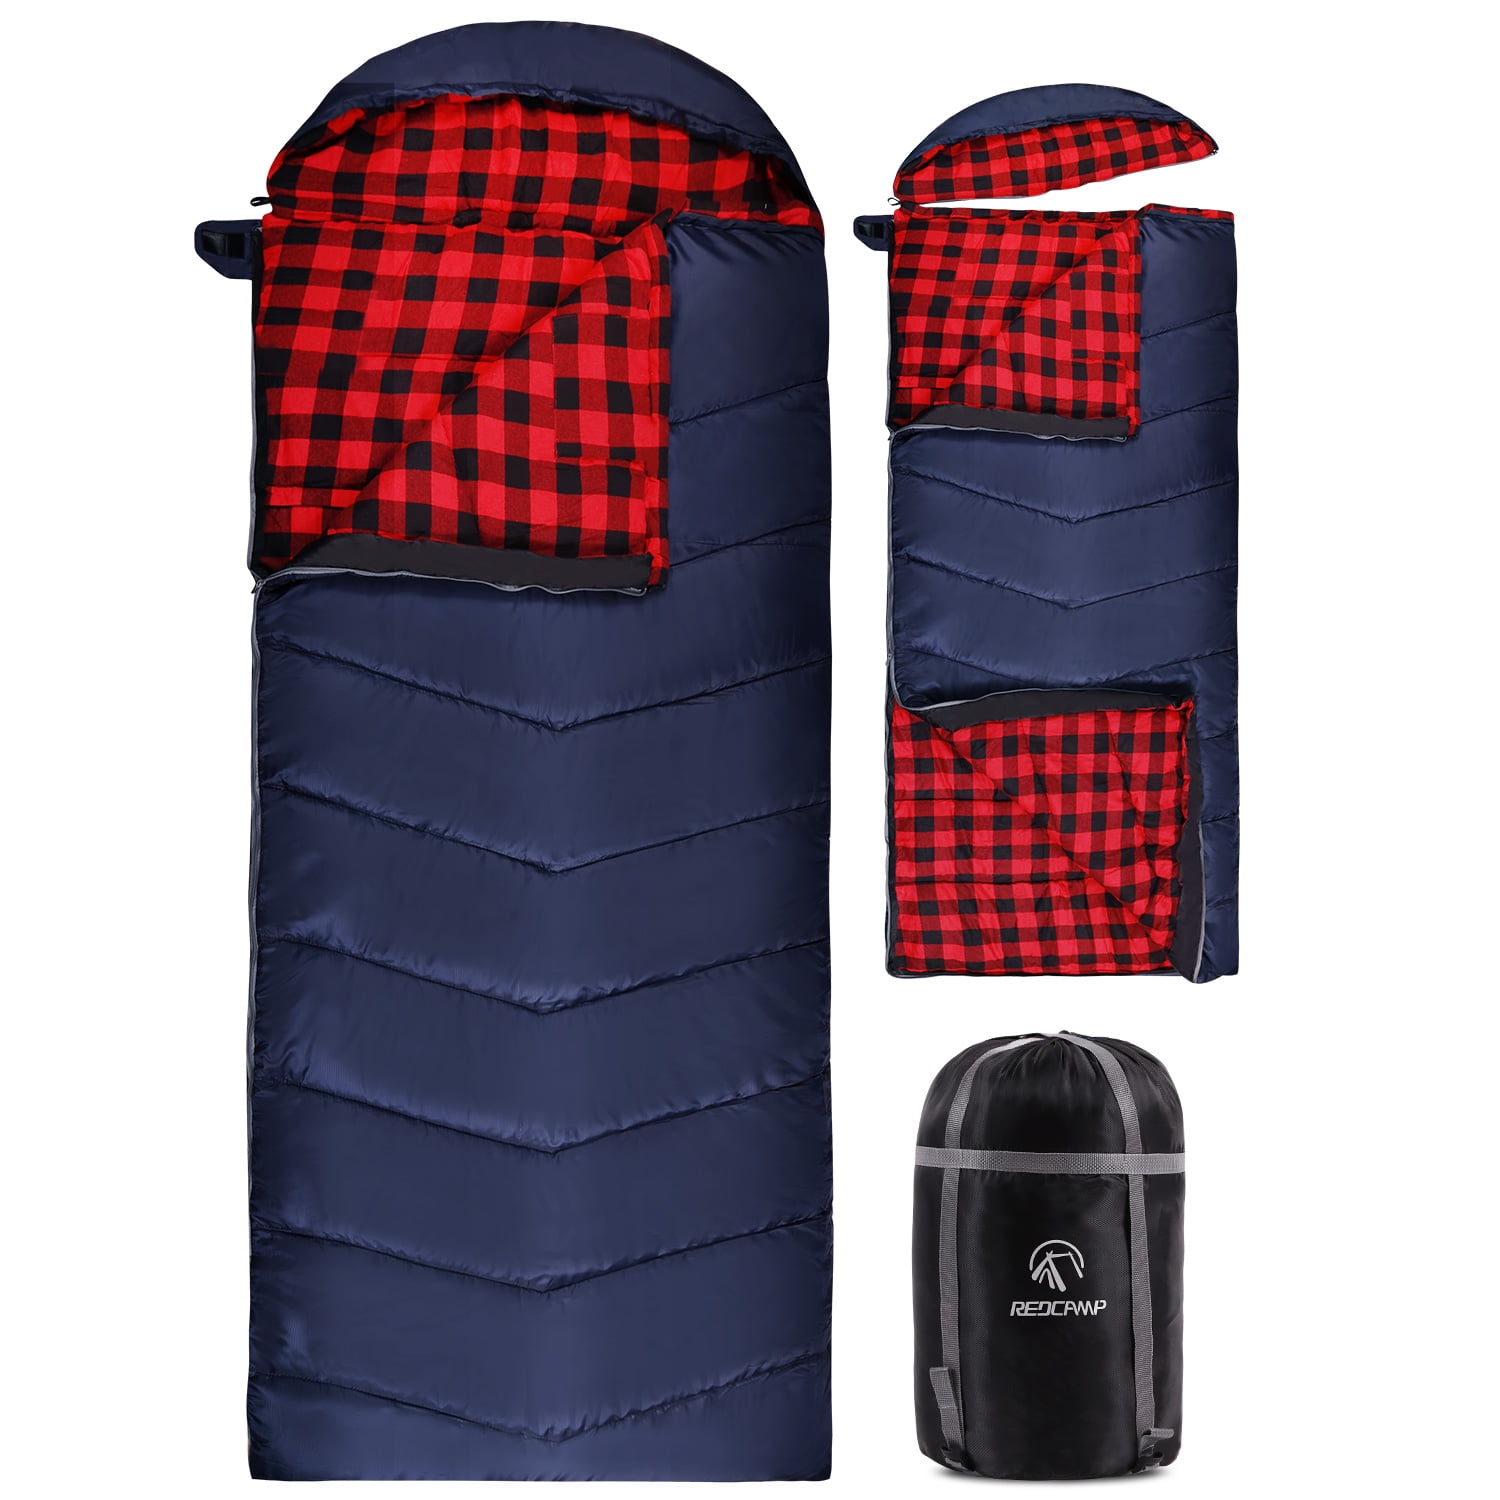 50F/10C 3-season Warm and REDCAMP Cotton Flannel Sleeping bag for Camping 